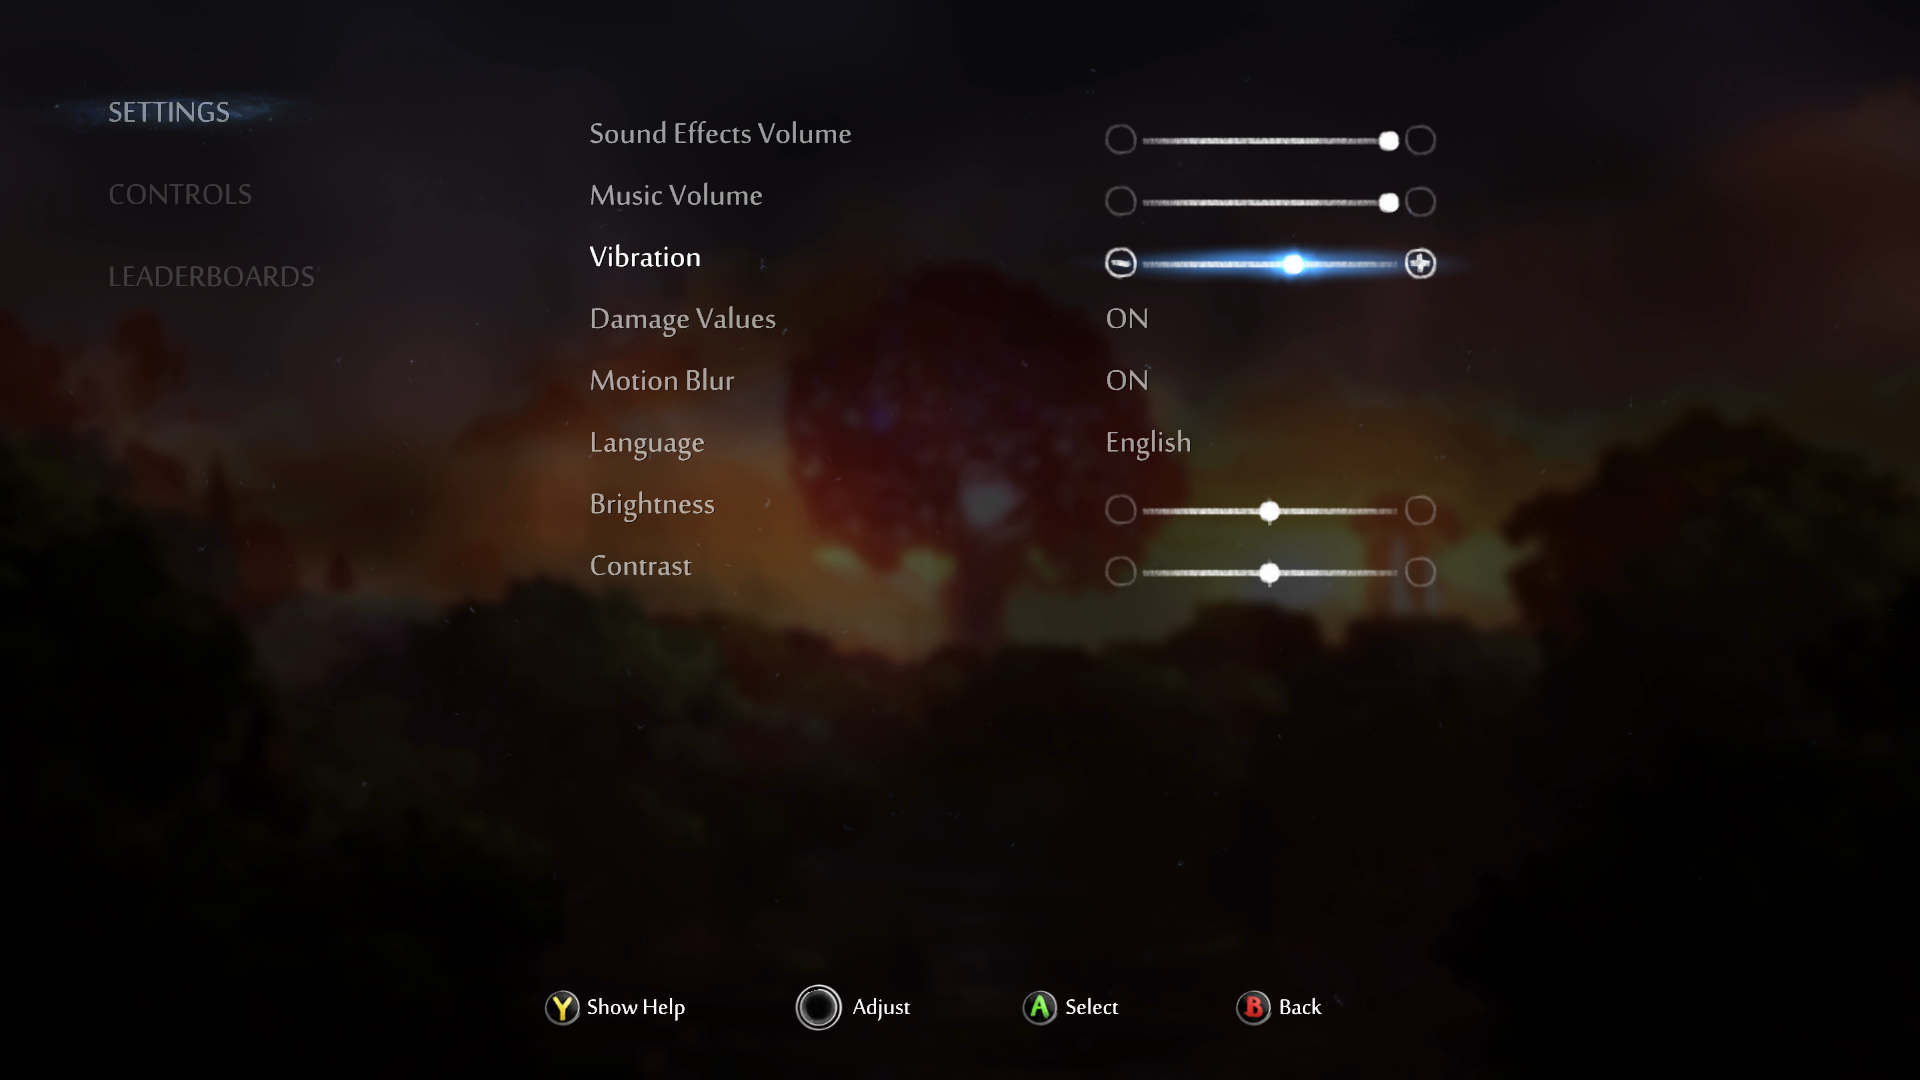 A screenshot from the Ori and the Will of the Wisps Settings menu. The Vibration setting has focus. The slider's current value visually appears to be set to about 75 percent intensity.